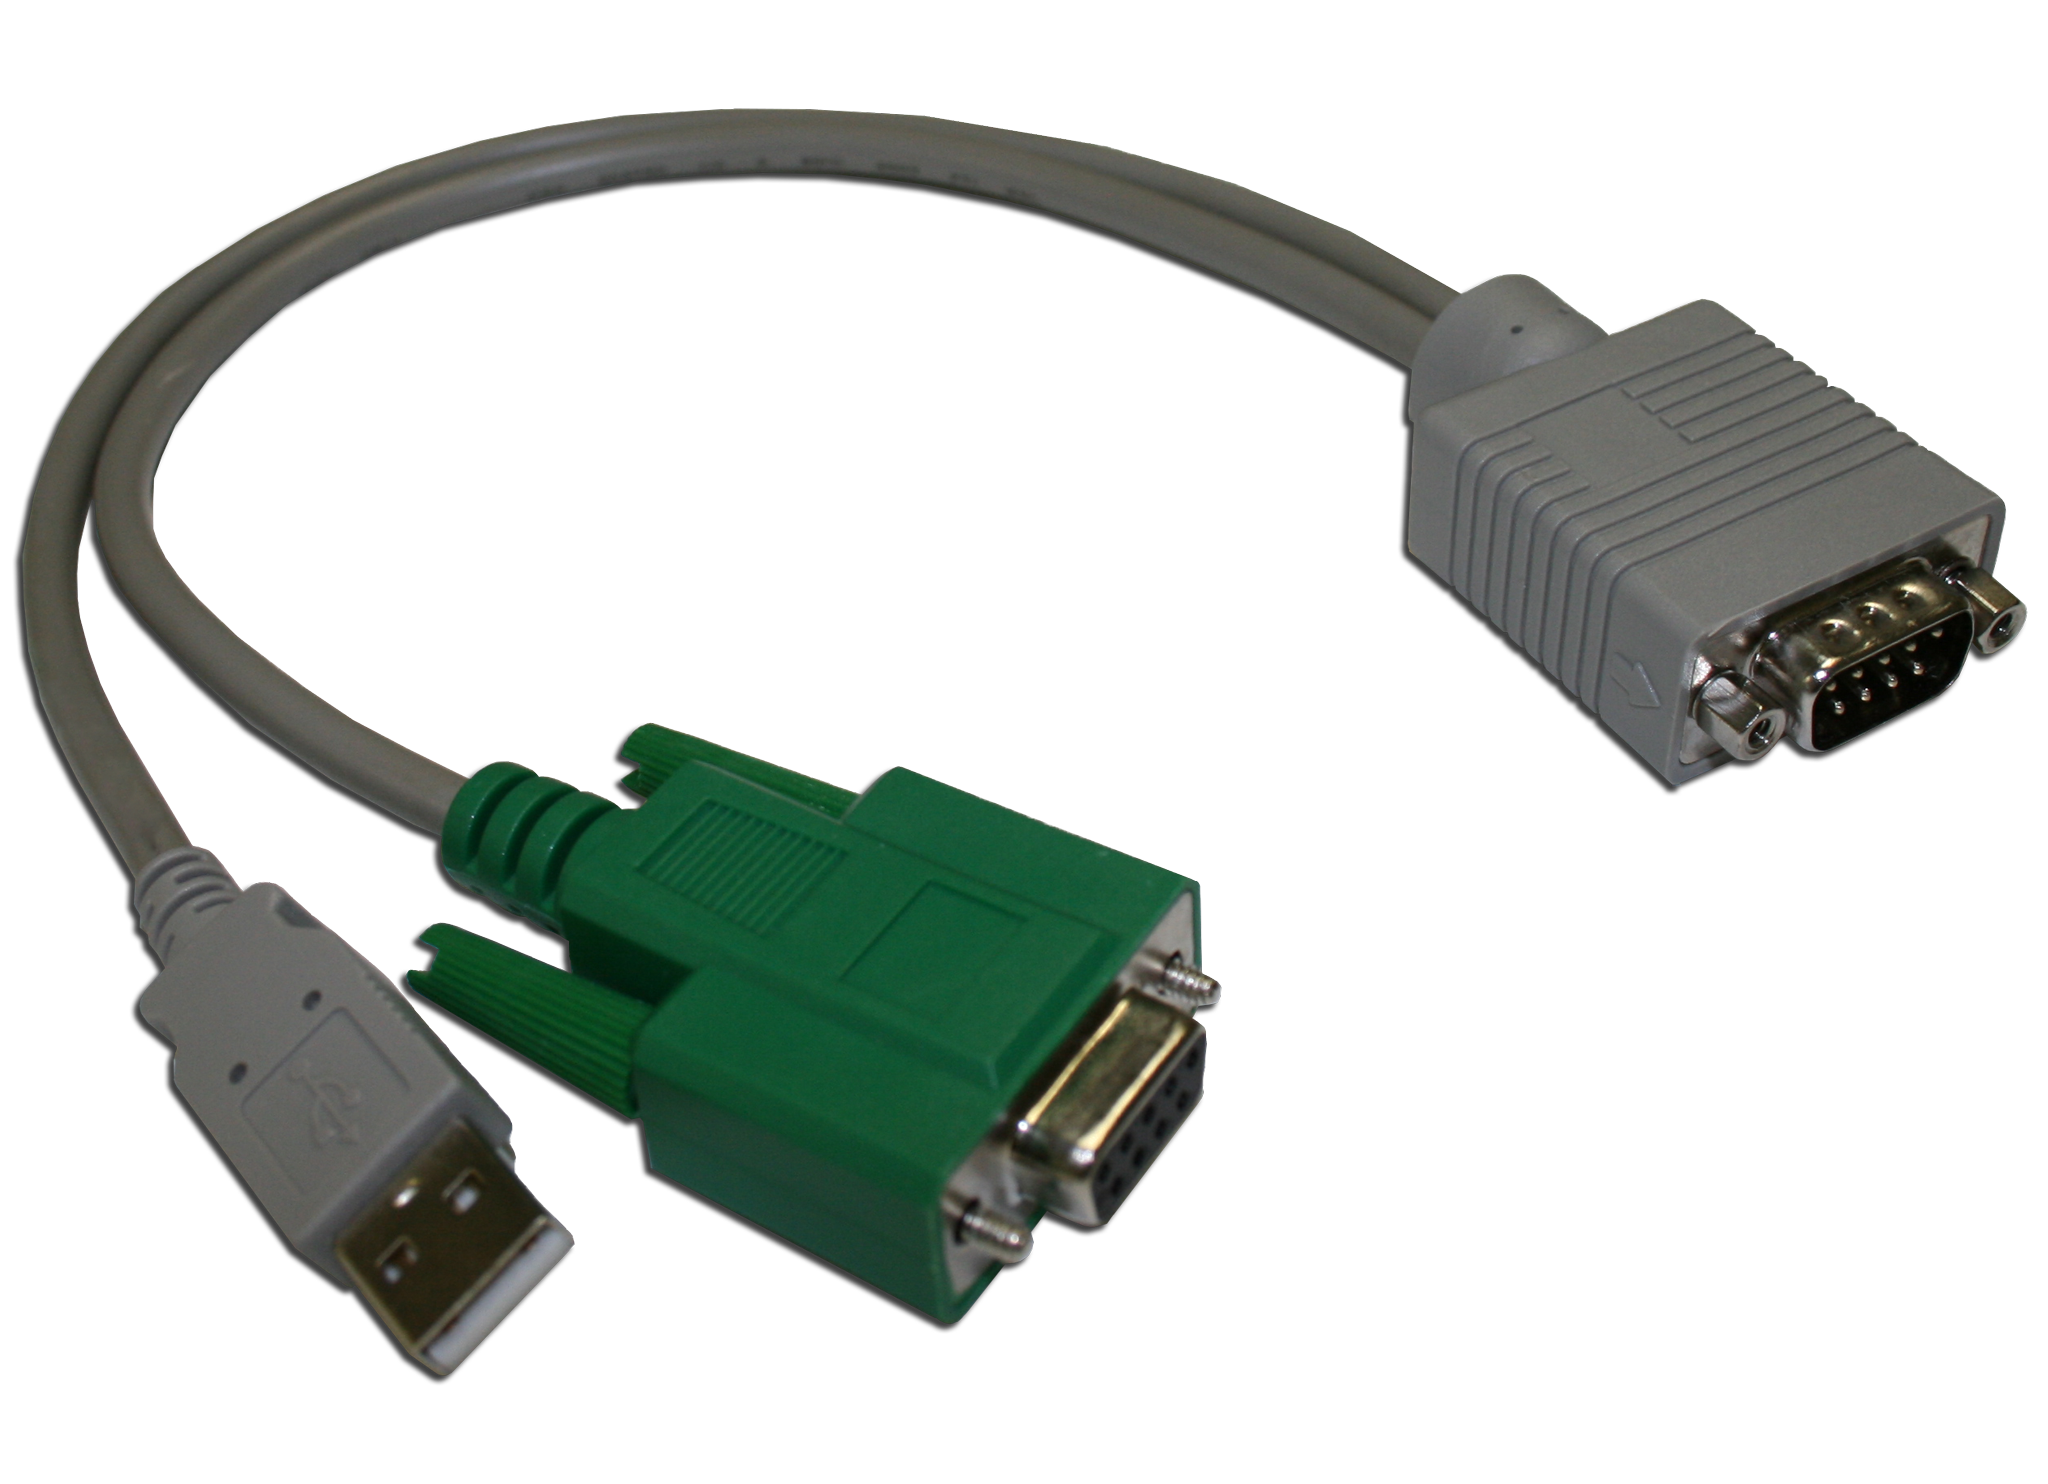 A-CSA4-3 Serial Cable Kit